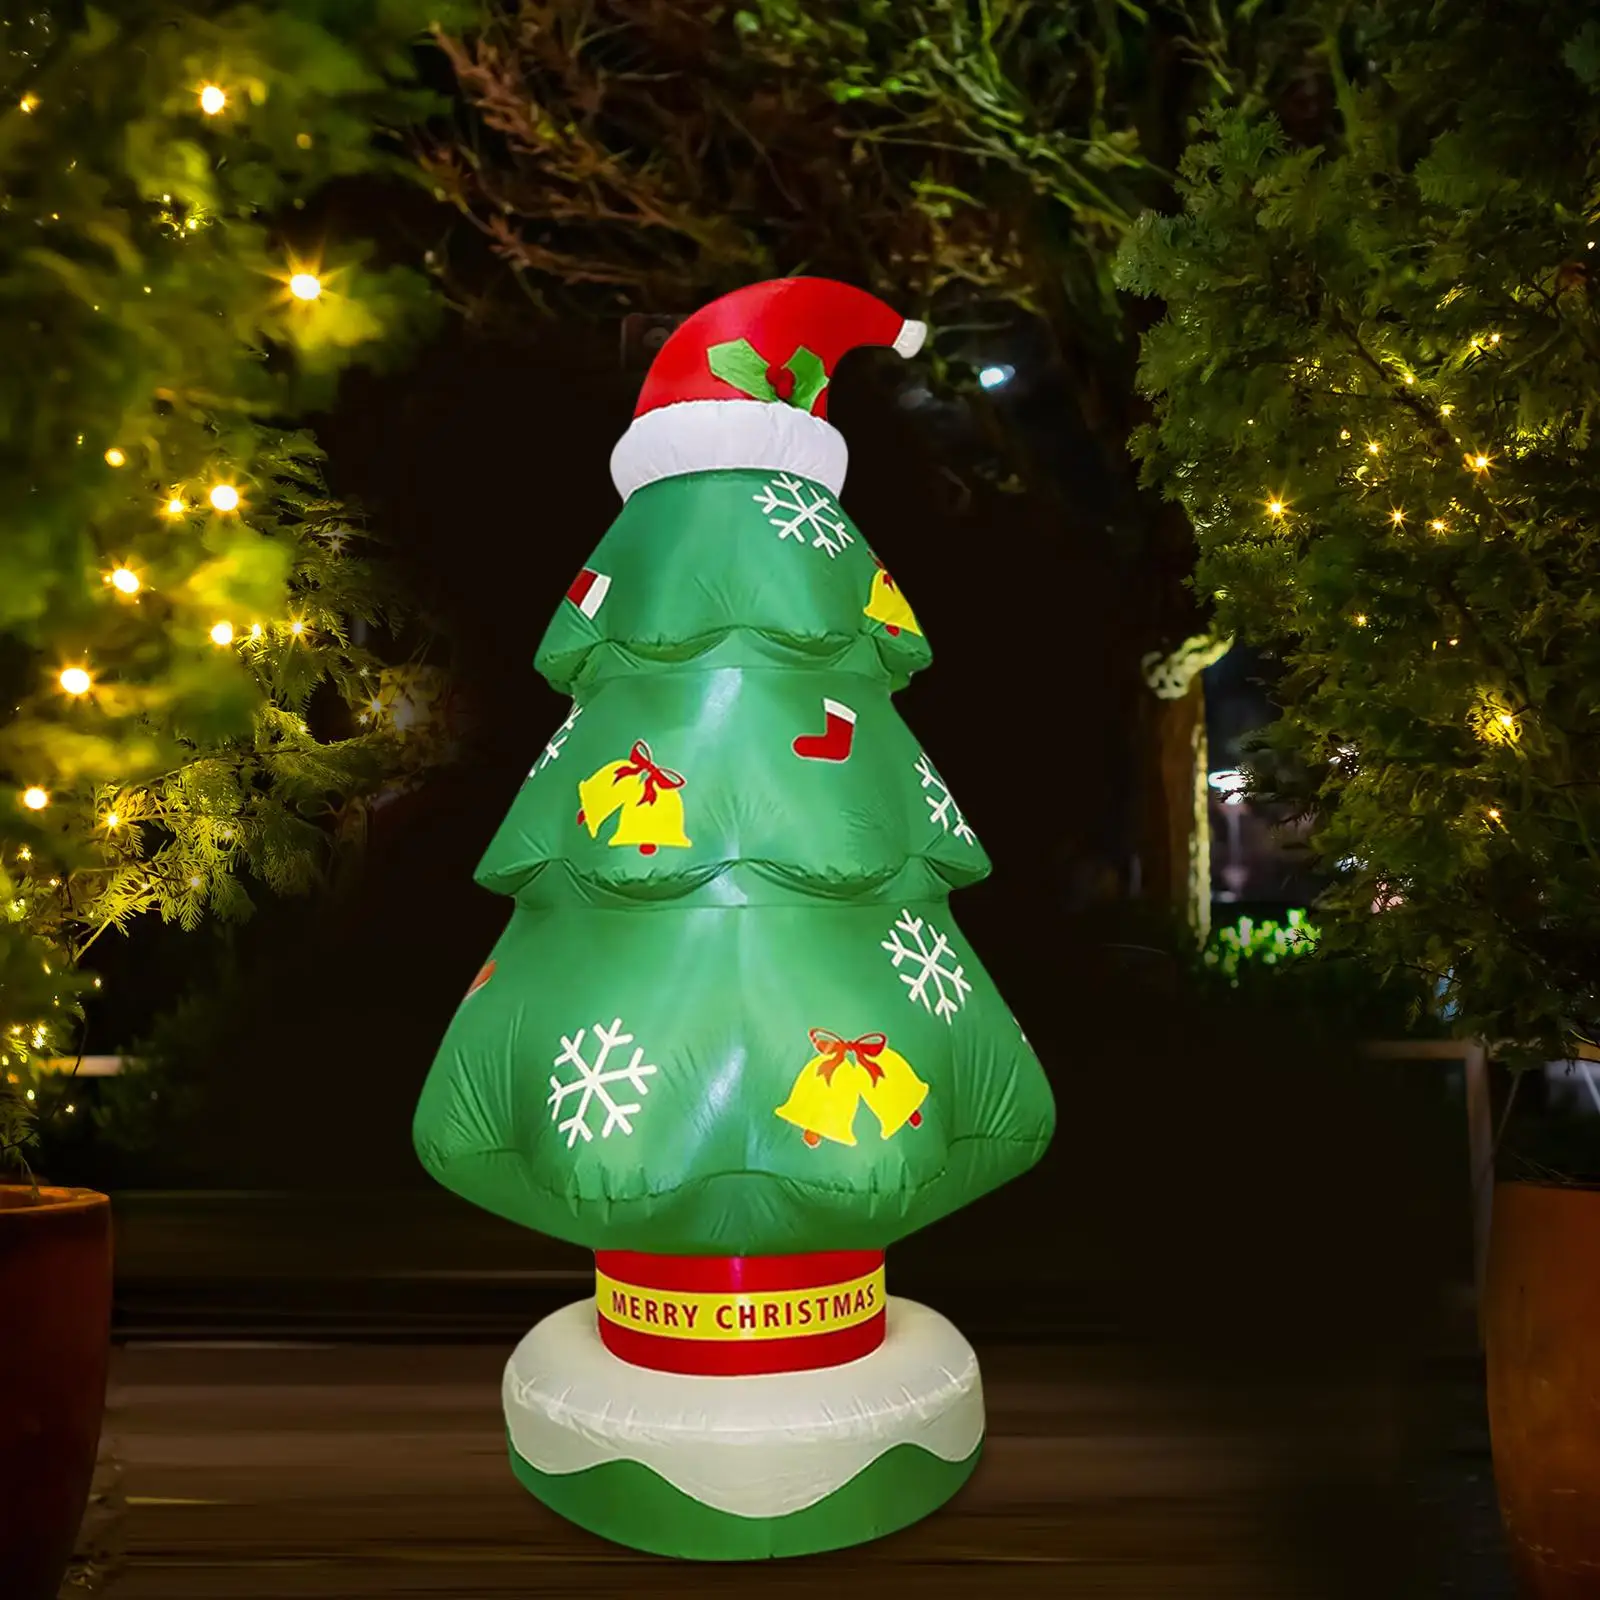 7ft Inflatable Christmas Tree Decoration LED Light up Luminous Toy Xmas Tree for Yard Lawn Garden Holiday Party Decor